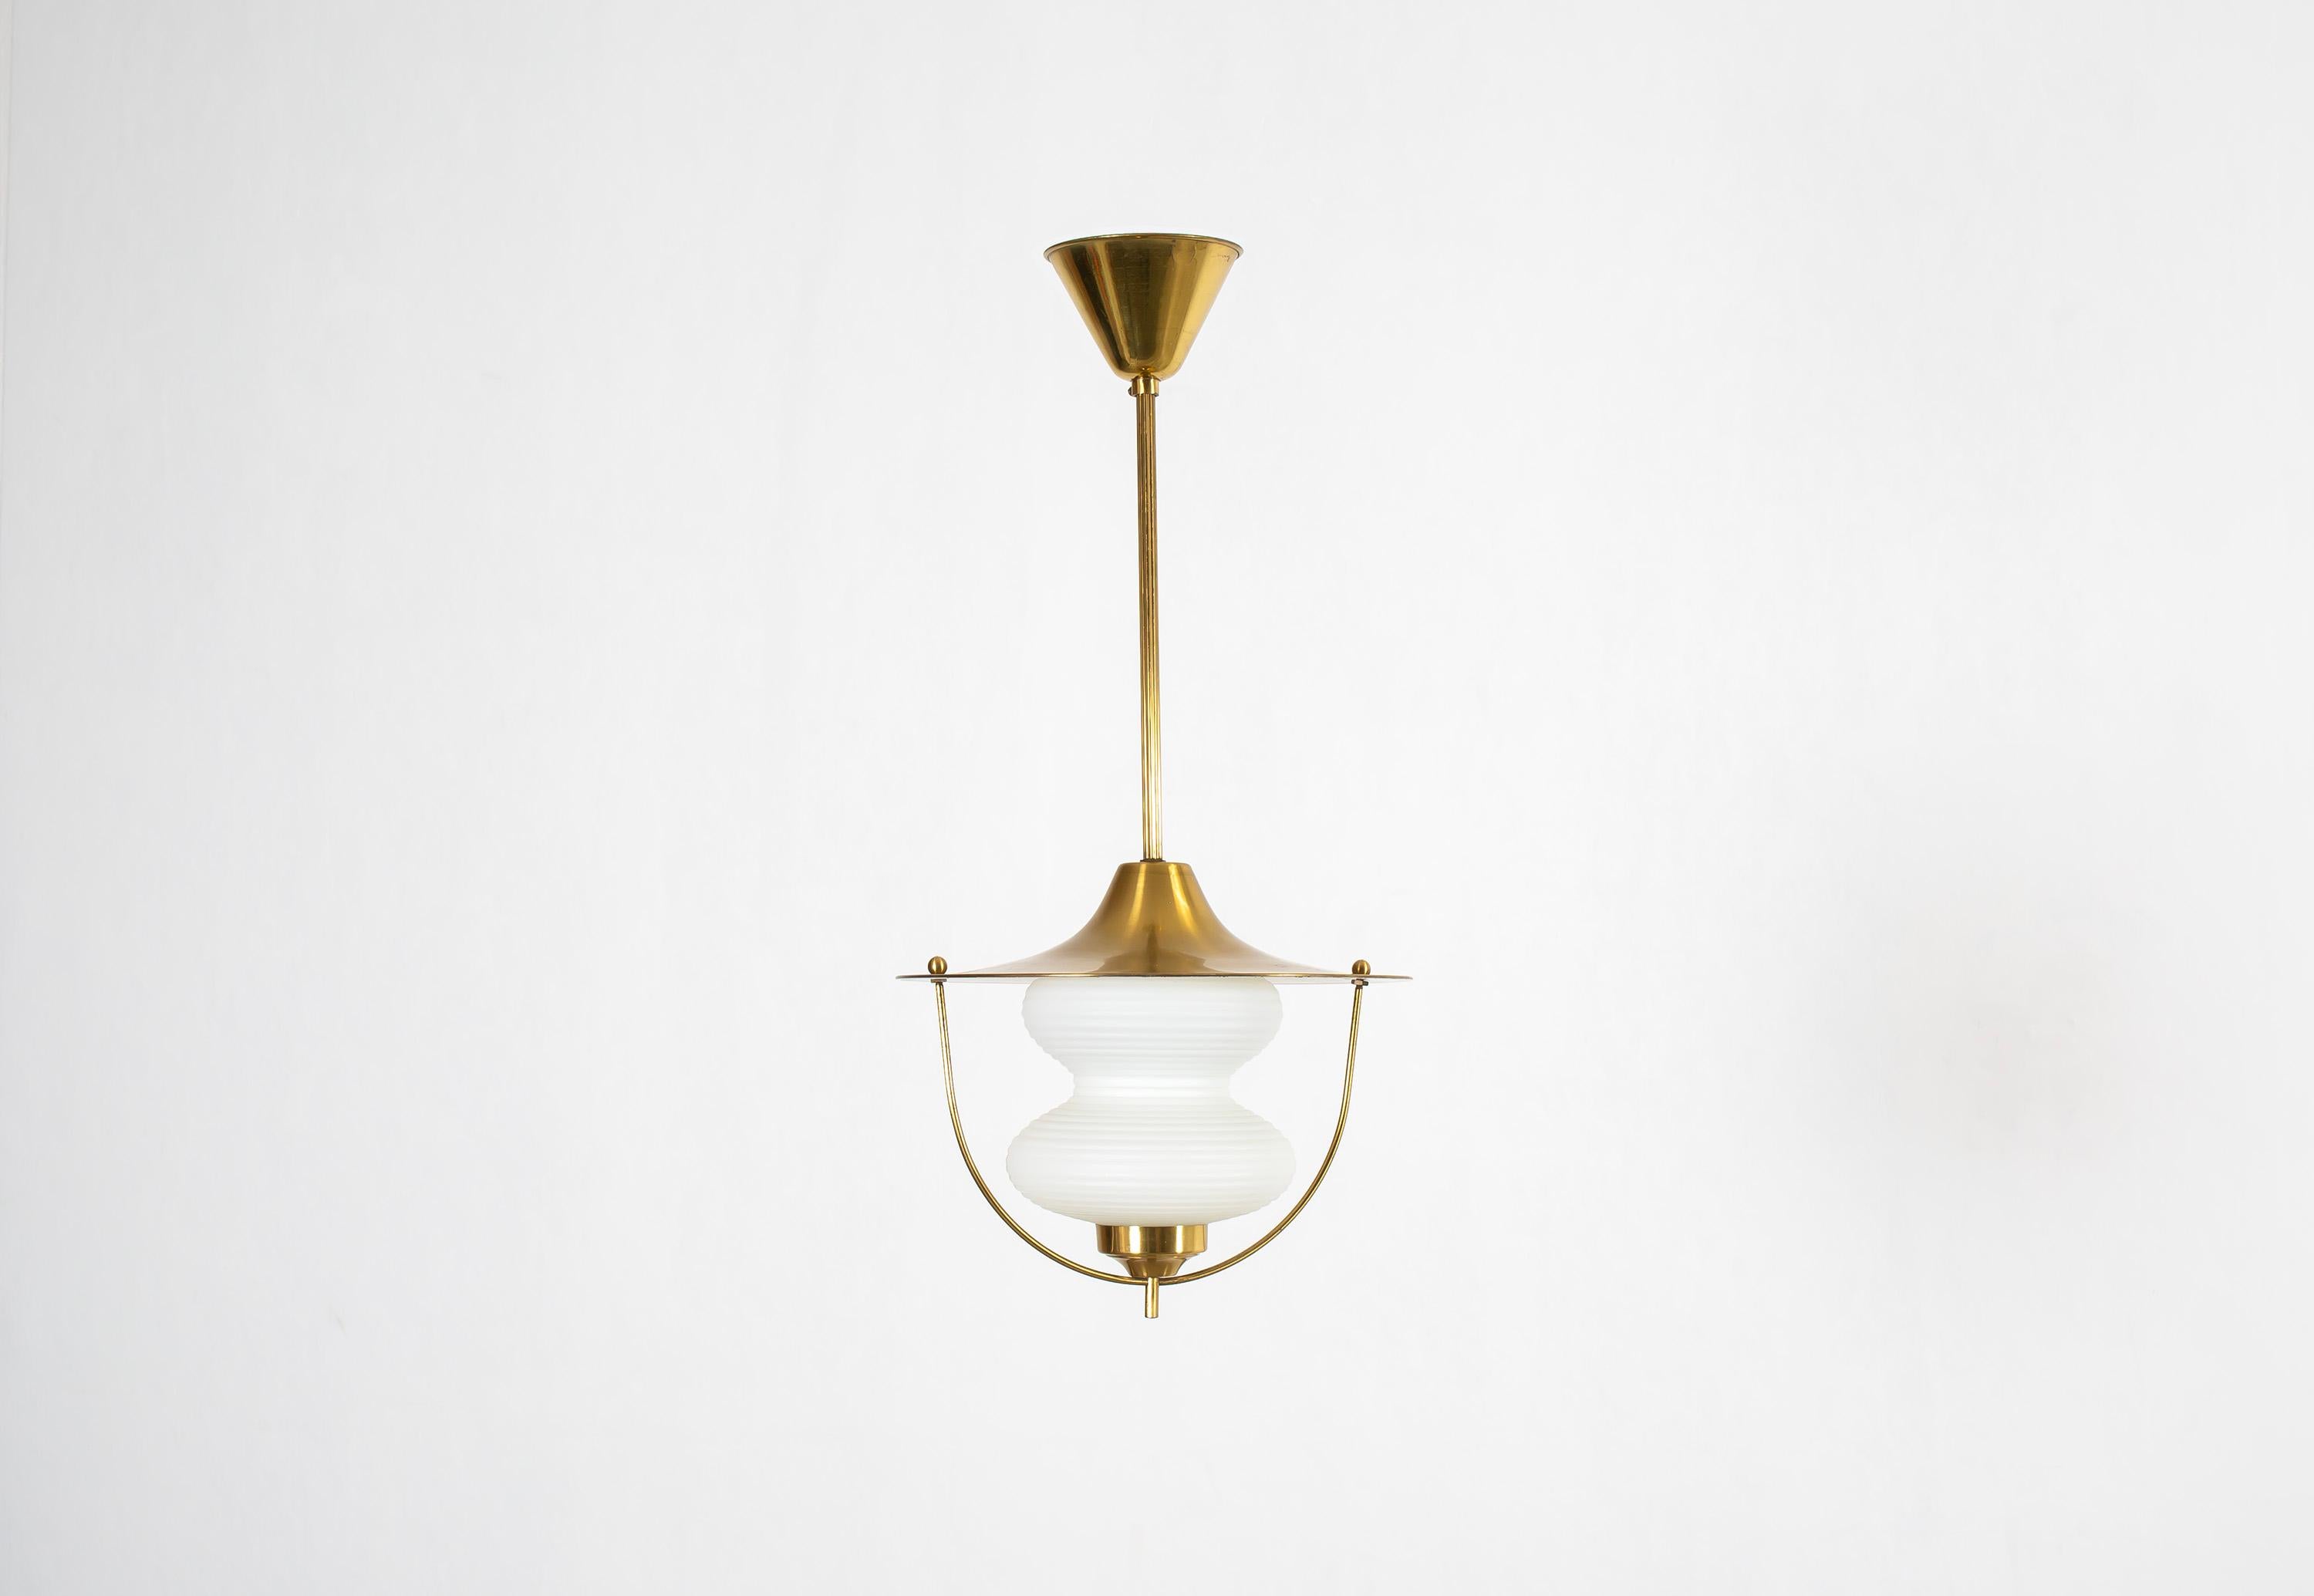 Modernist ceiling light in brass with a shade in opaline glass. Designed and made in Norway from cirka 1960s first half. The lamp is fully working and in good vintage condition. It is fitted with one E27 bulb holder (works in the US), with a max